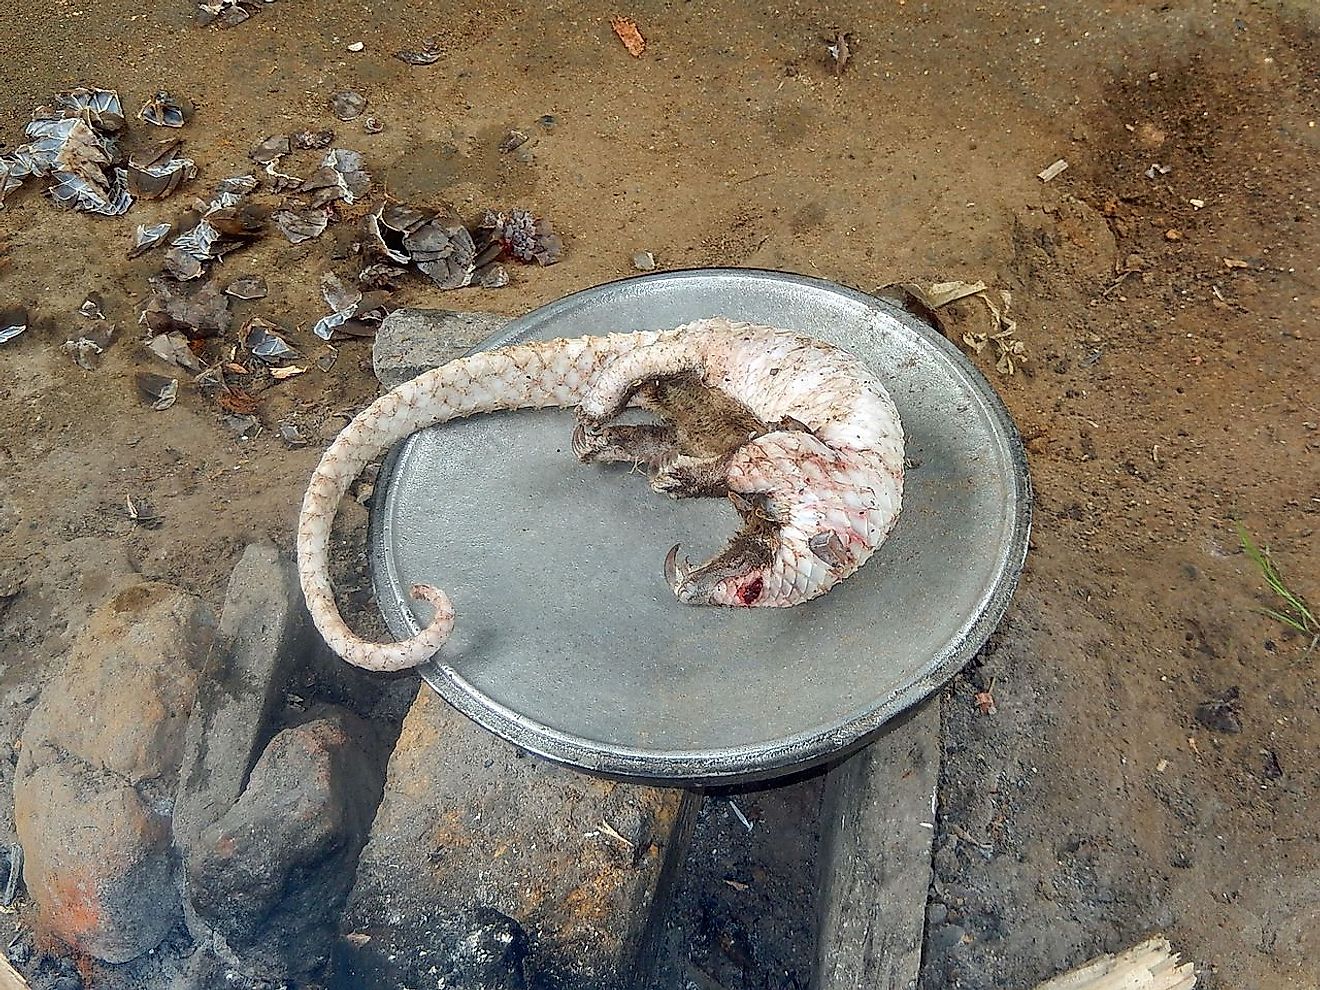 A poached pangolin prepared for cooking. Image credit: Eric Freyssinge/Wikimedia.org